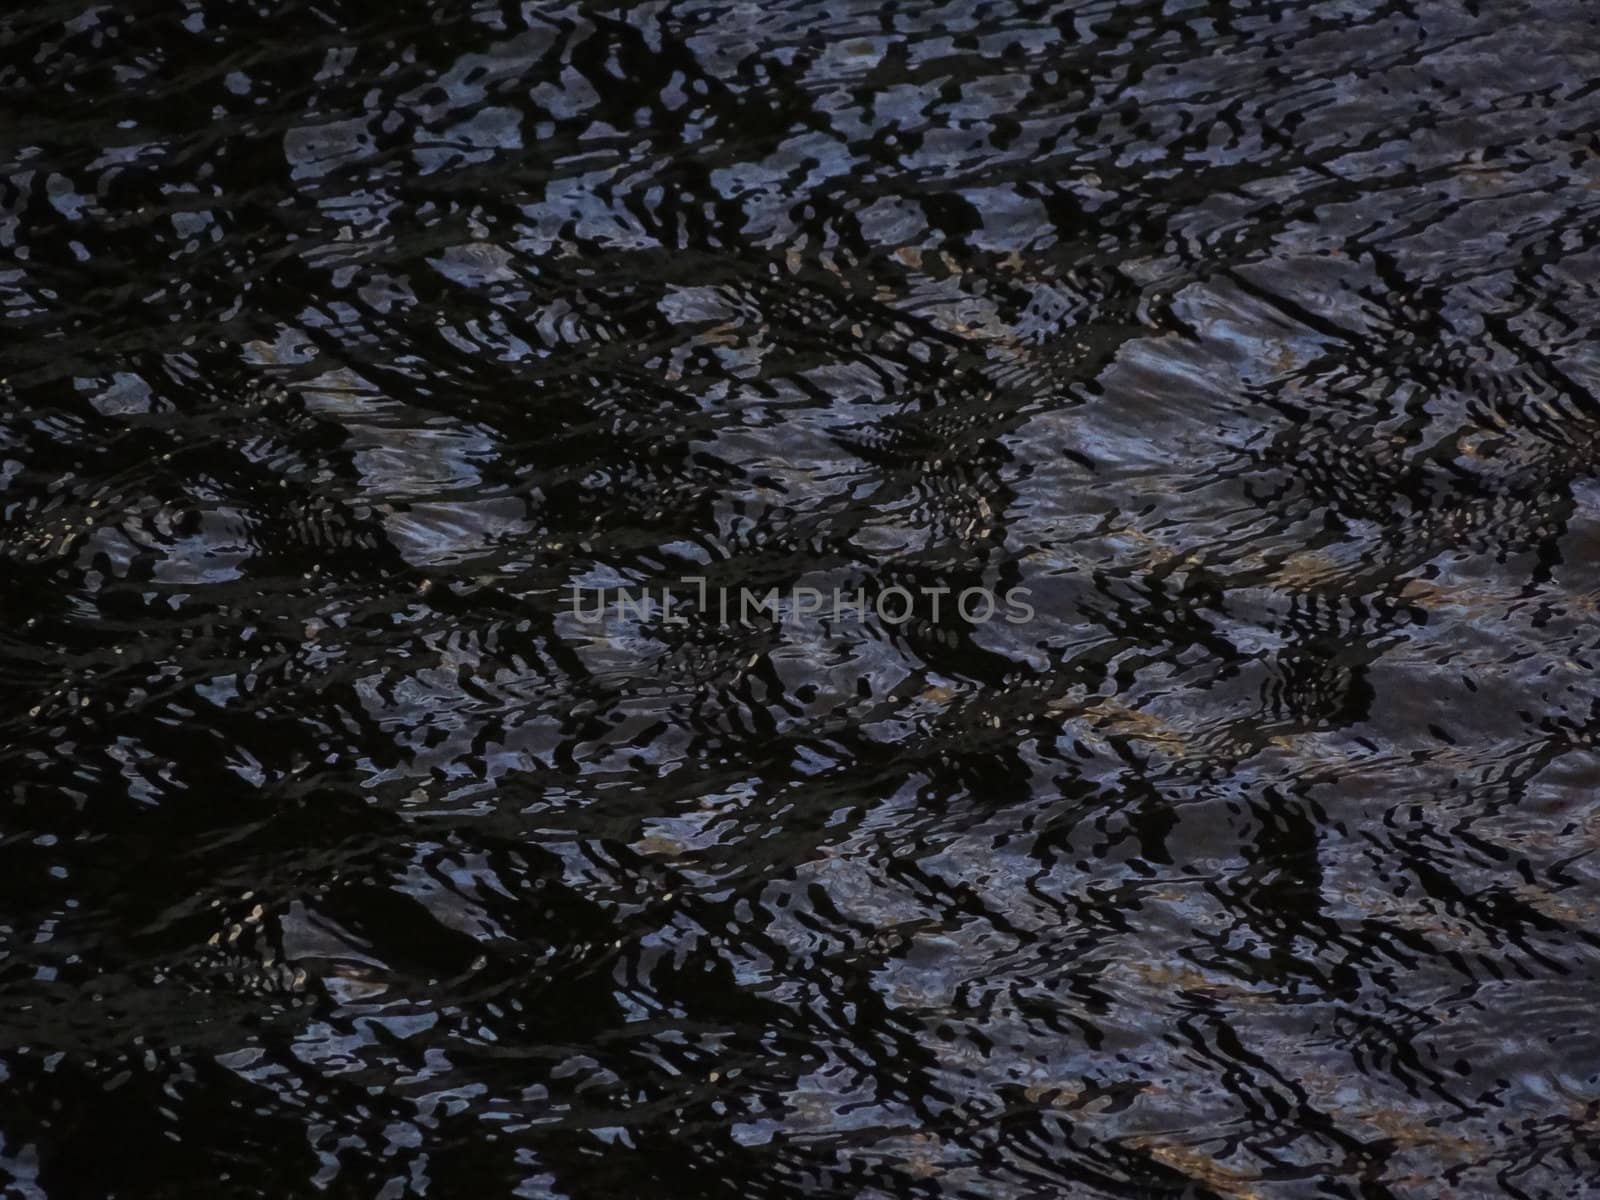 Ripples by Mbatelier